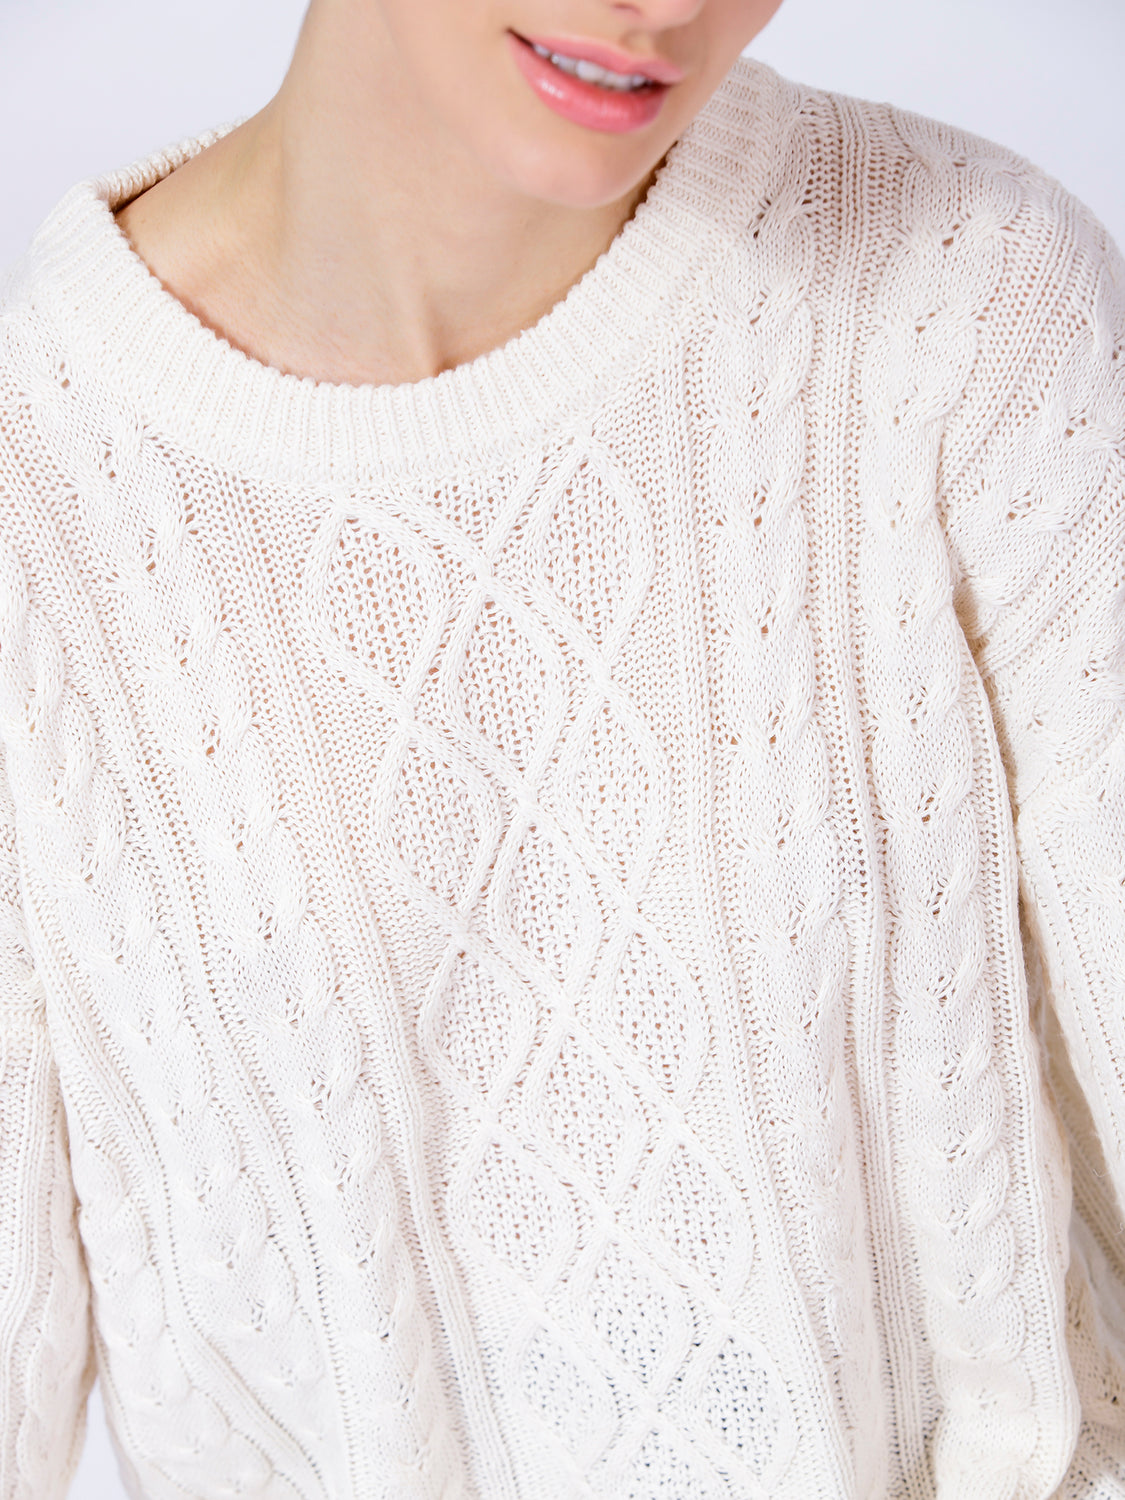 OVERSIZED CABLE KNIT SWEATER, CREAM